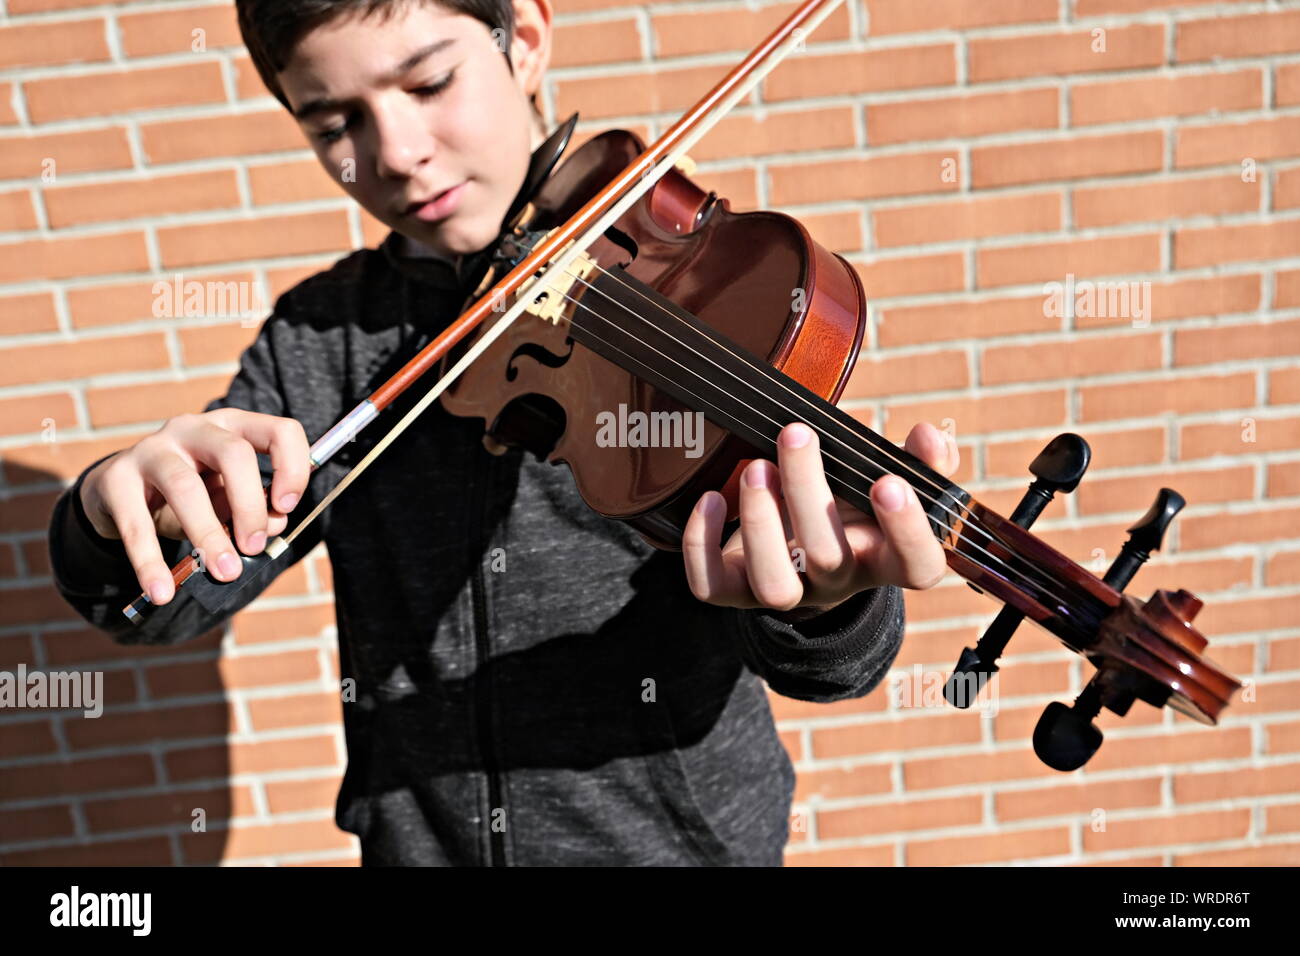 teenager playing violin with shallow depth of field Stock Photo